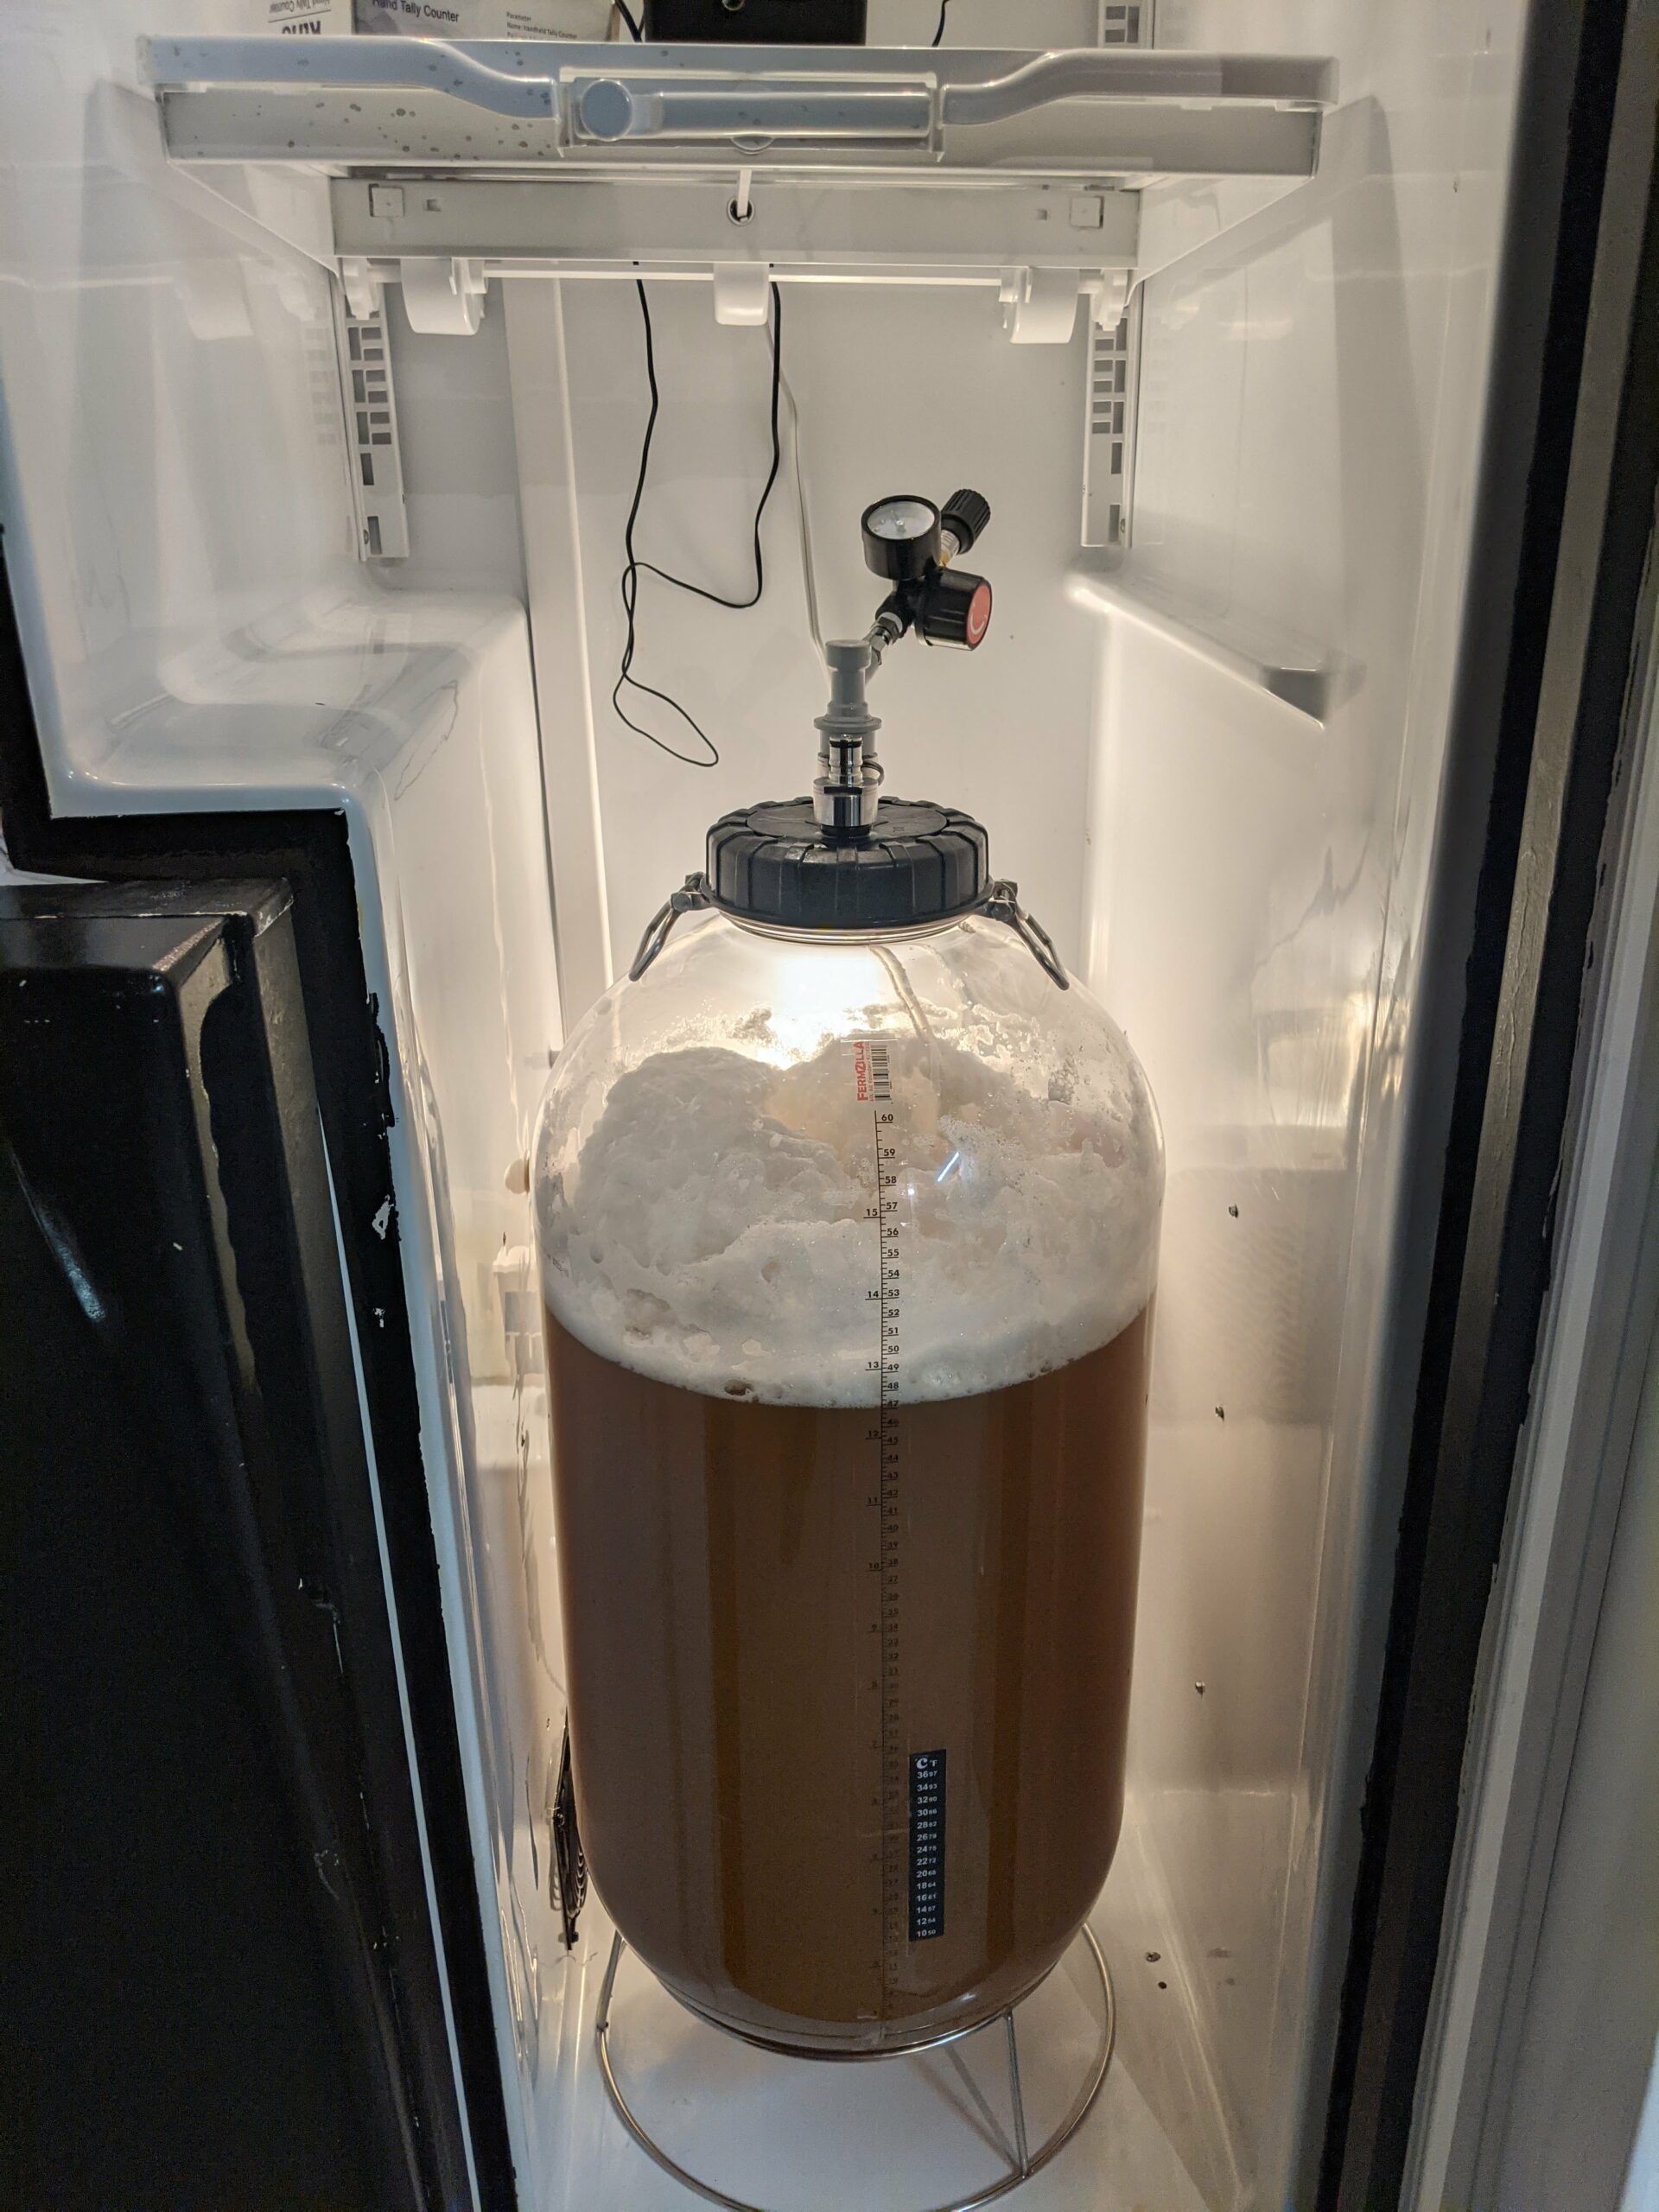 Can i safely bend cdn thermometer probe  Homebrew Talk - Beer, Wine, Mead,  & Cider Brewing Discussion Forum